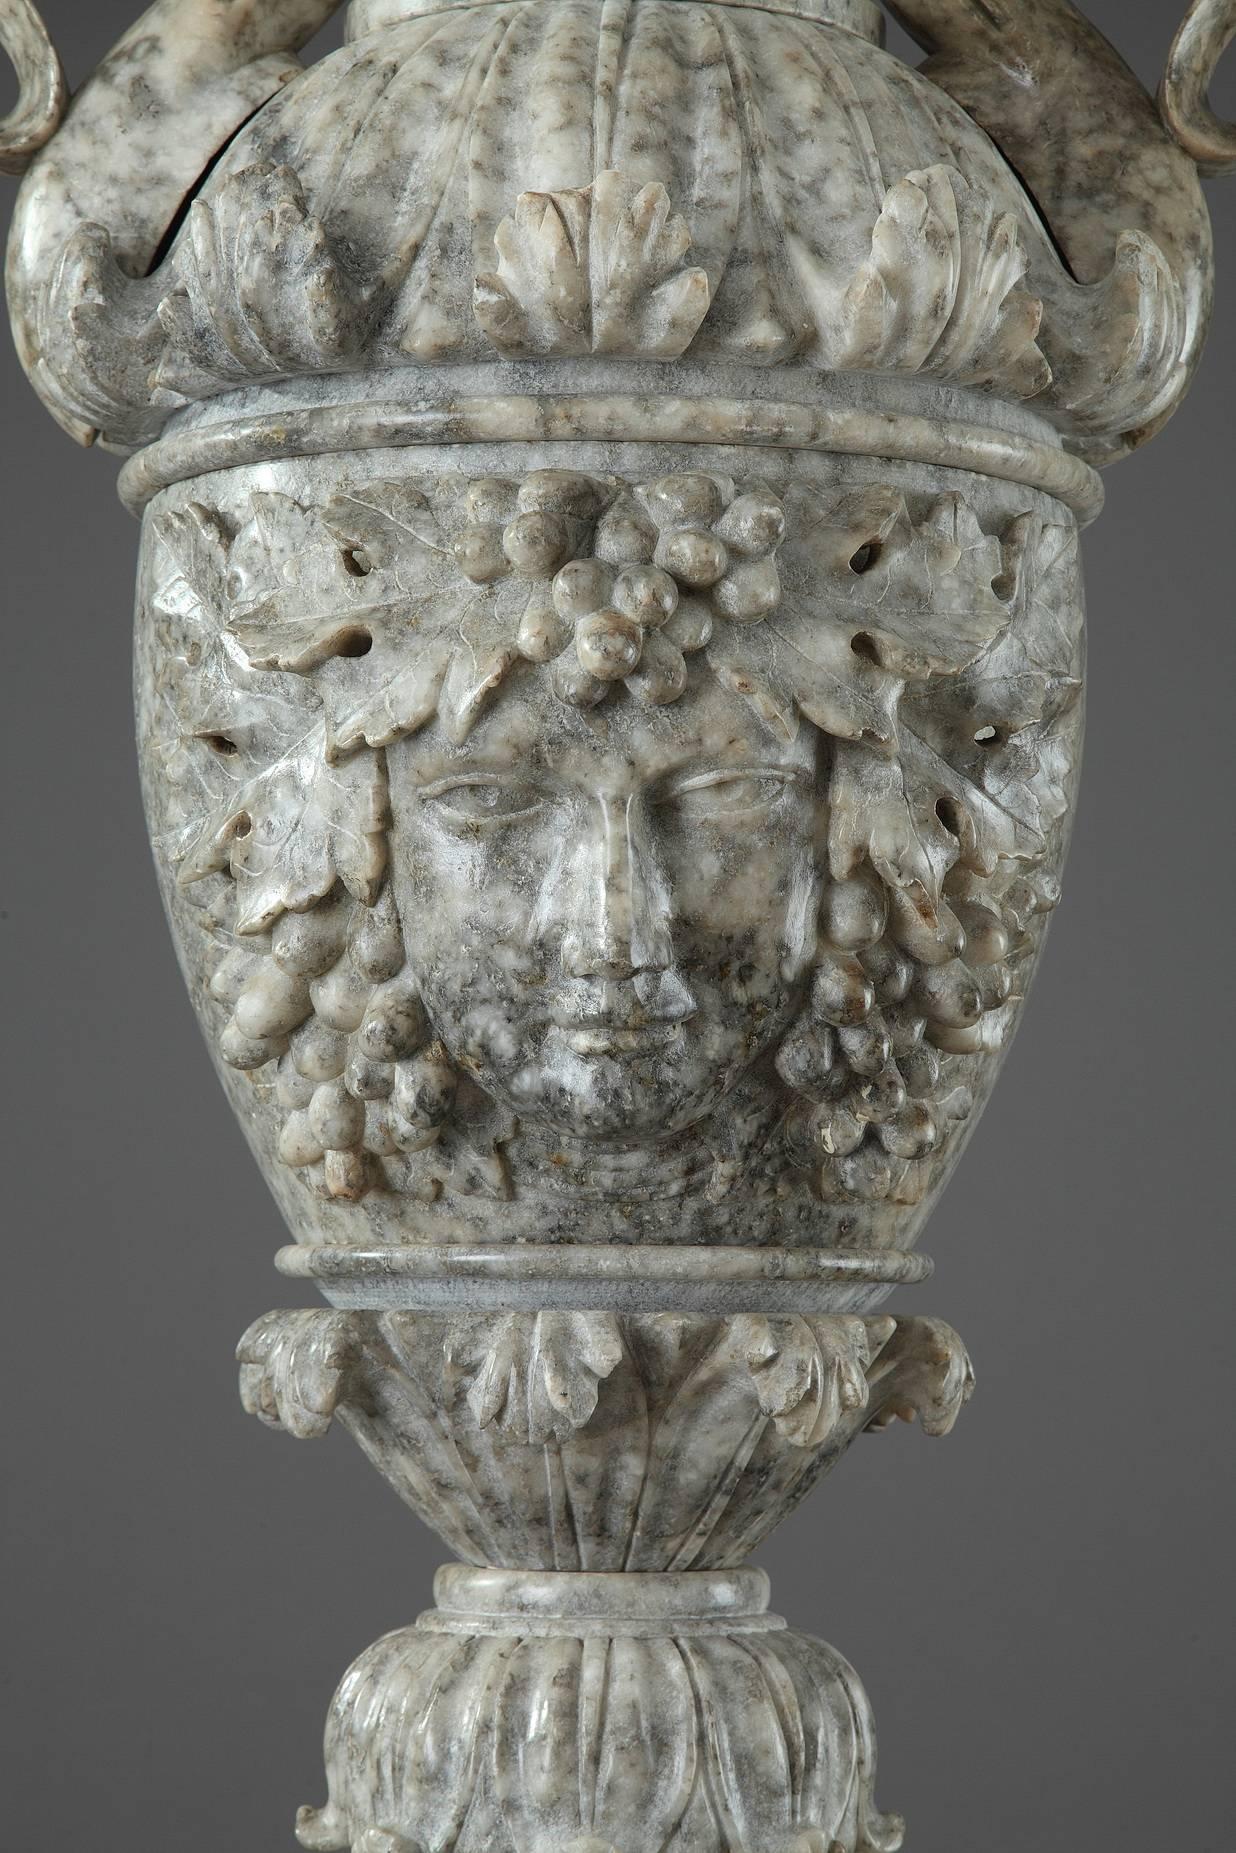 Sumptuous French alabaster pedestal crafted in the first half of the 19th century. Taking the form of an architectural column, this antique pedestal is topped by an urn accentuated with Bacchus head, acanthus and lotus leaves. The urn is flanked by